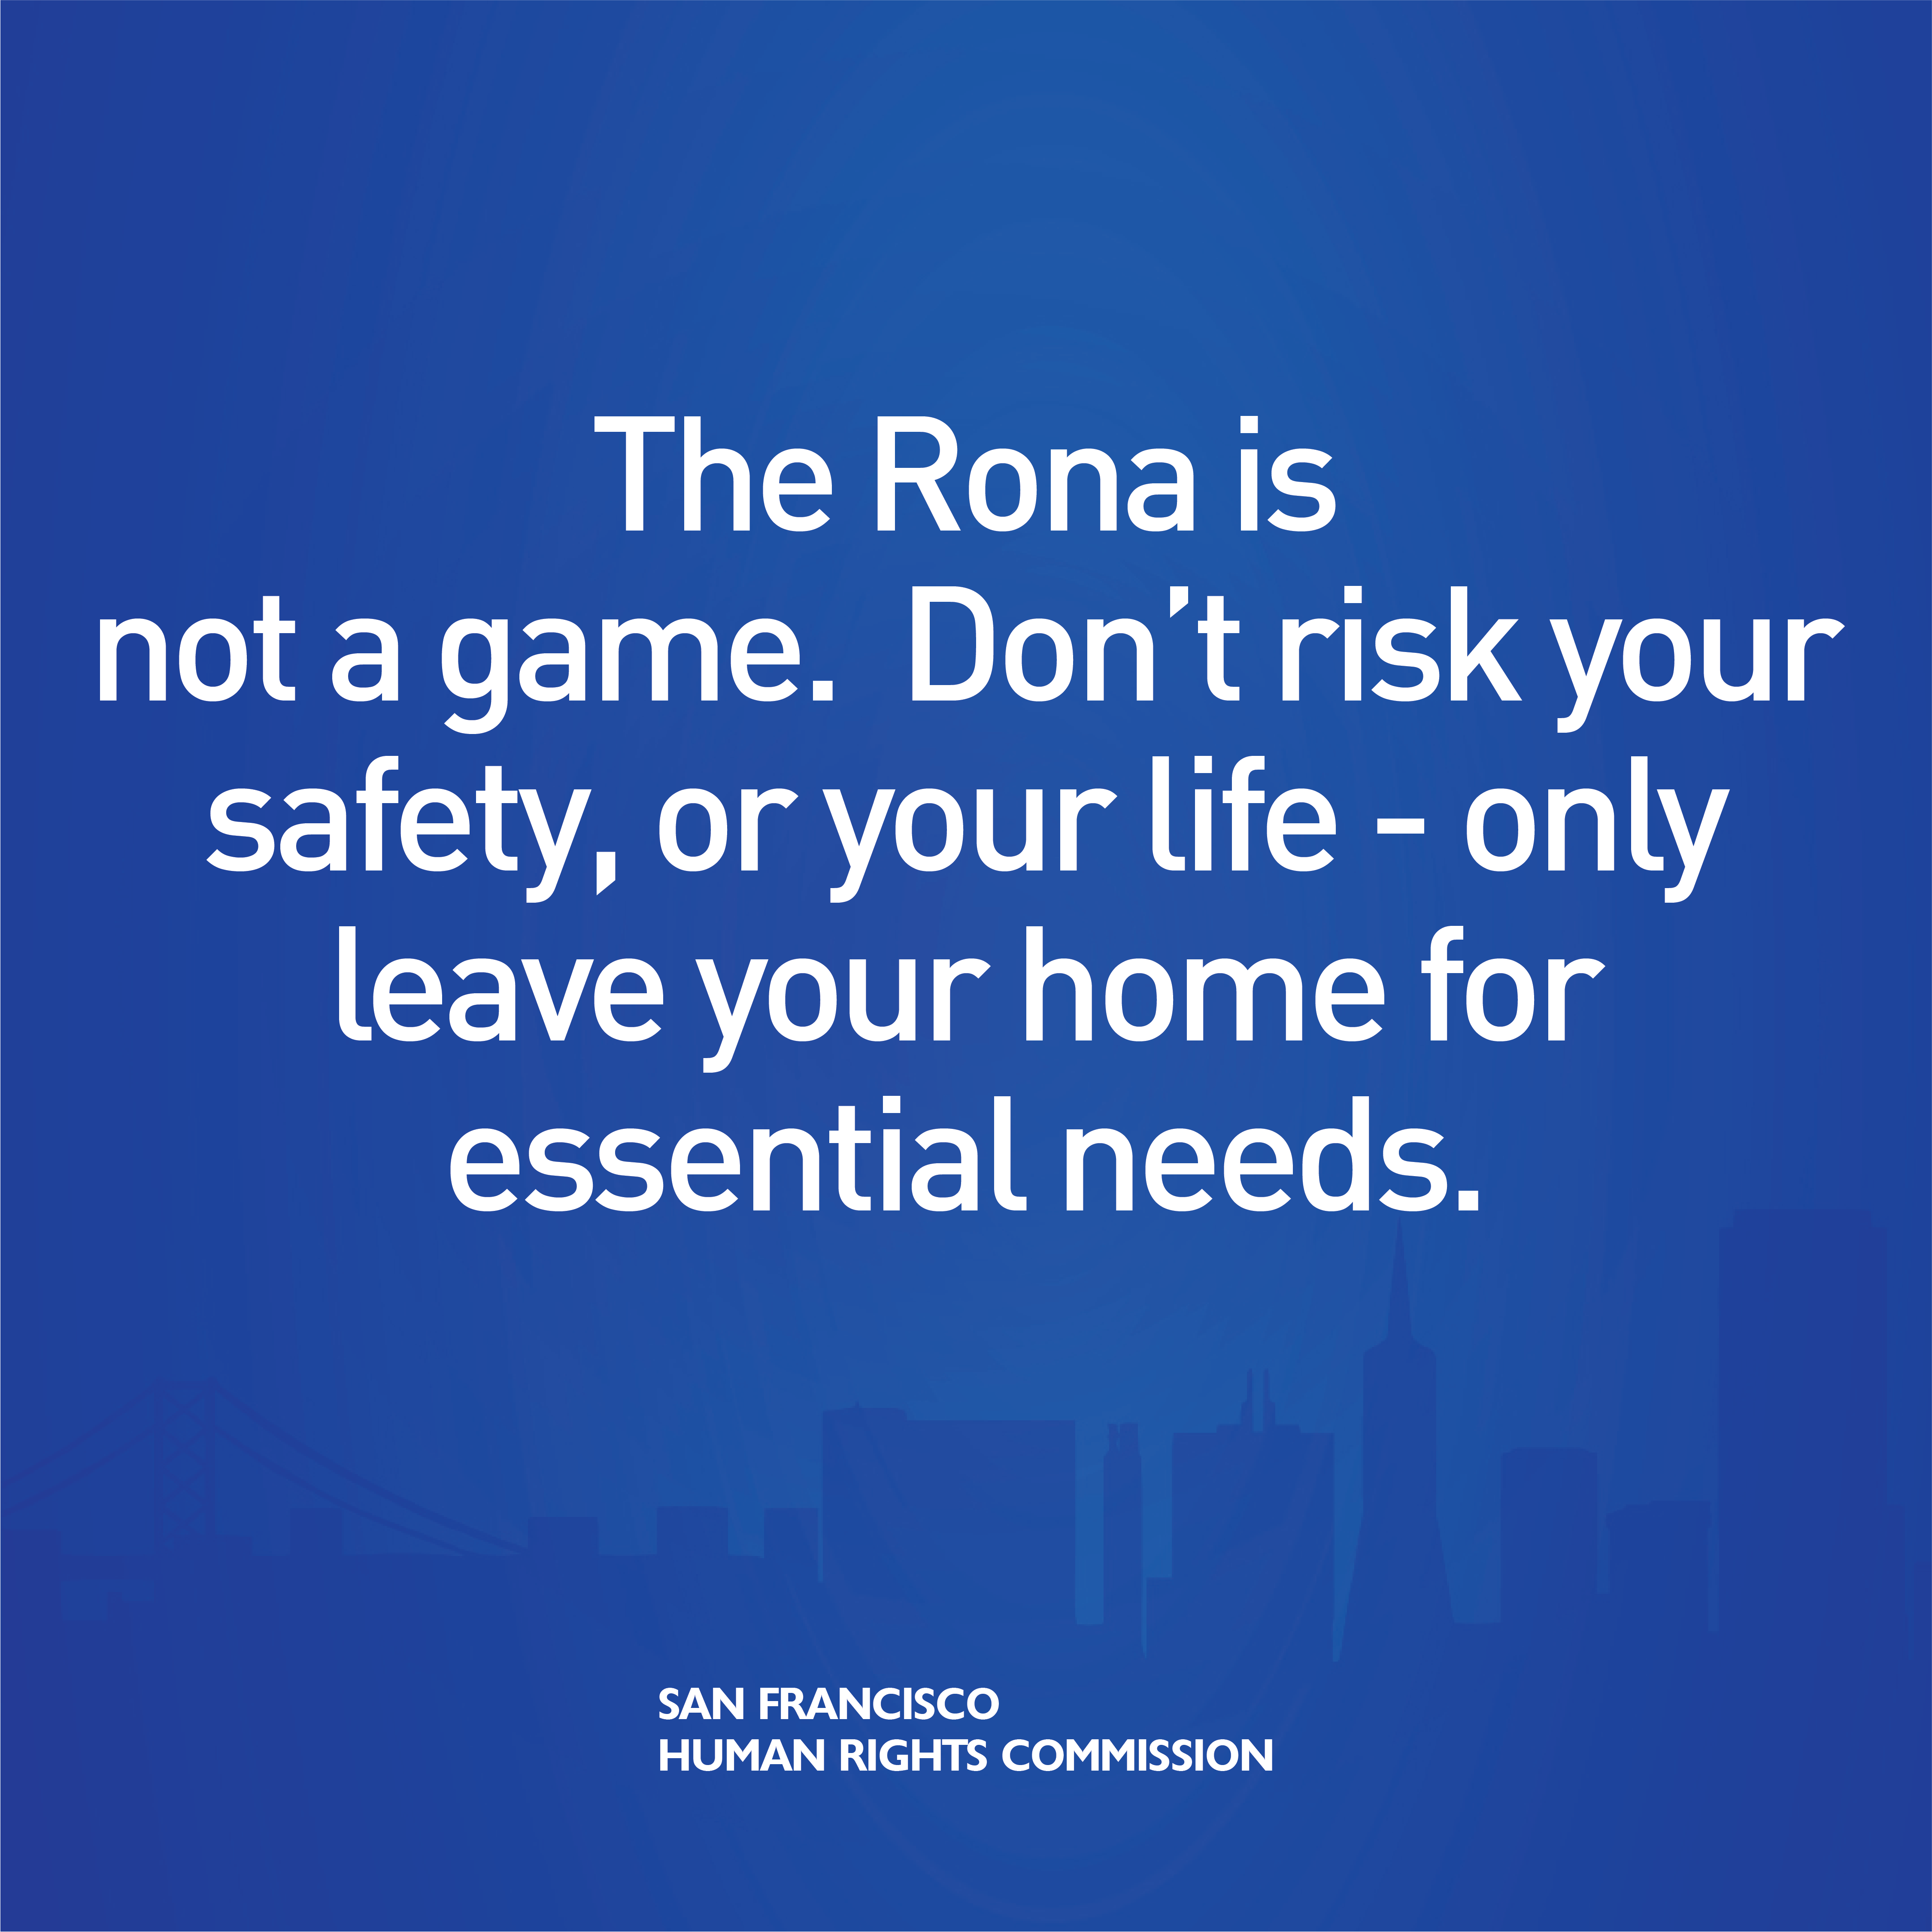 The Rona is not a game.  Don't risk your safety, or your life - only leave your home for essential needs.